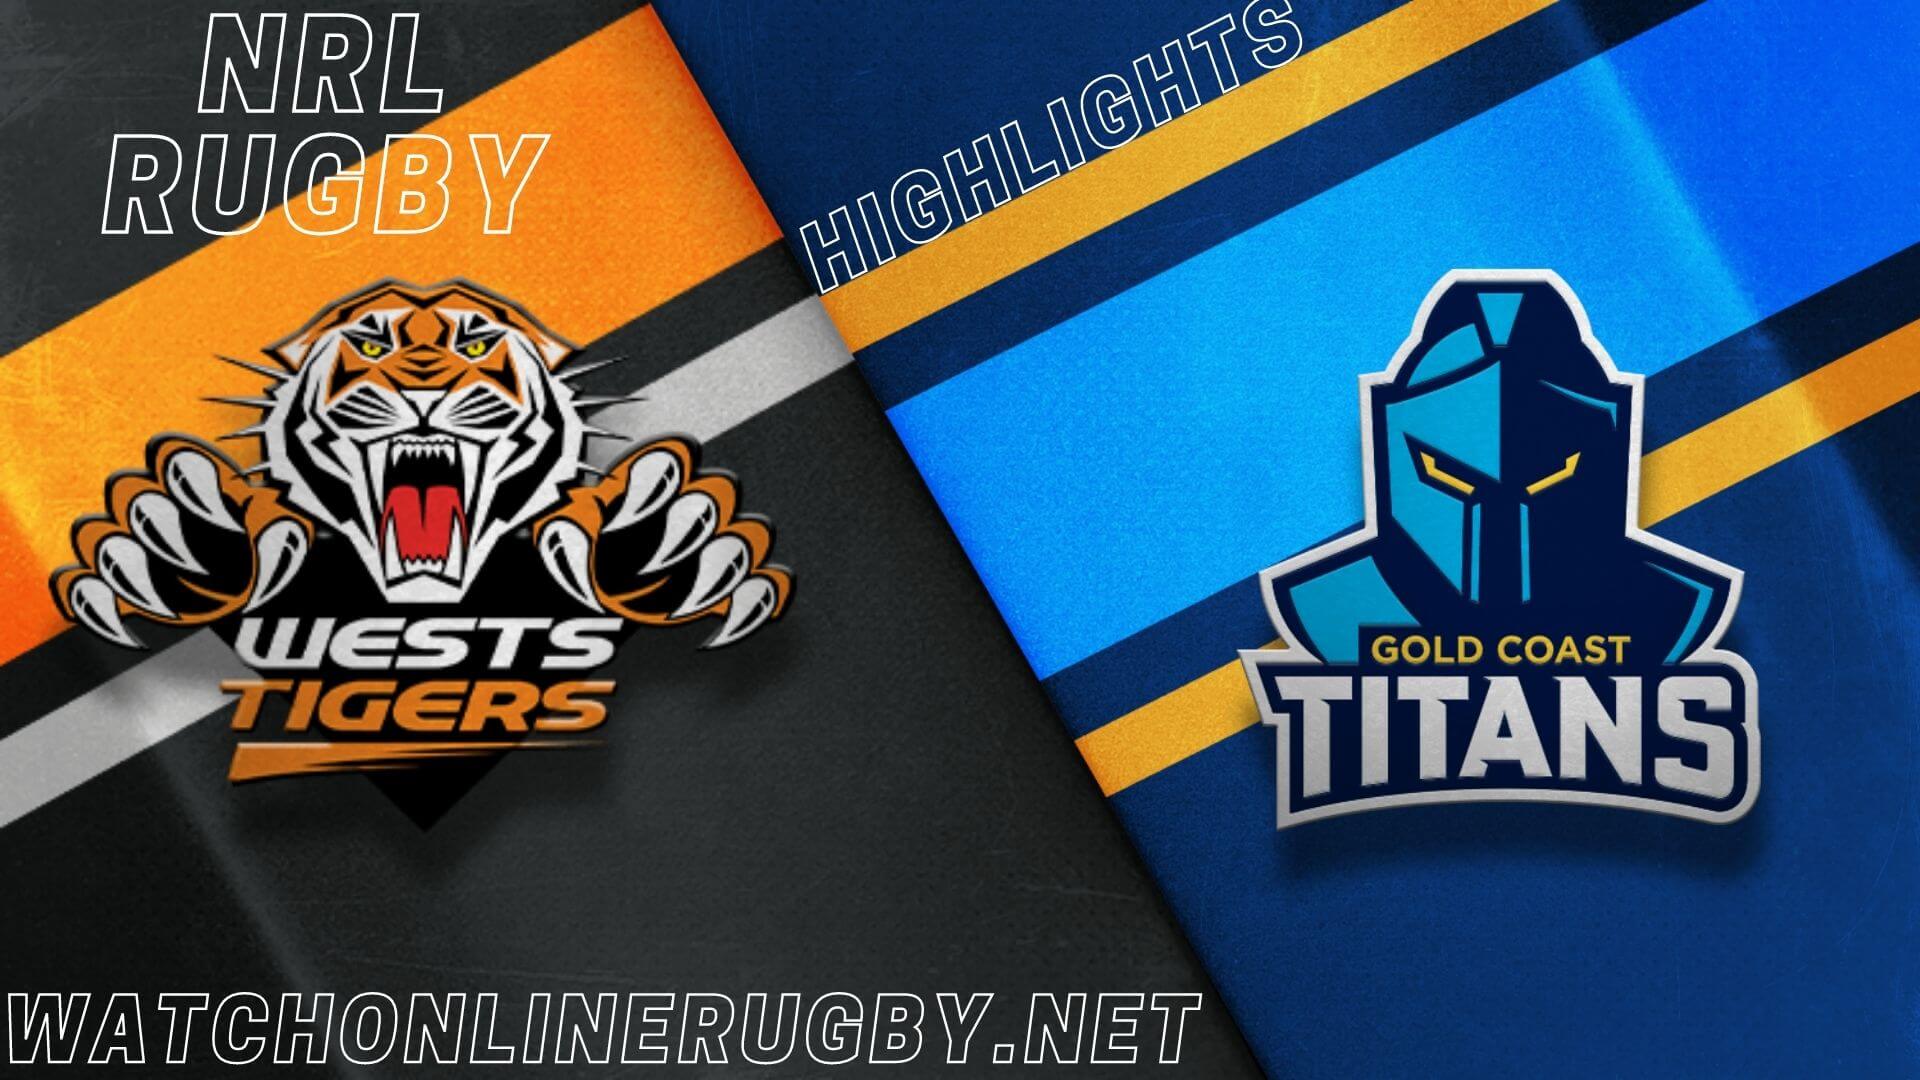 Titans Vs Wests Tigers Highlights RD 4 NRL Rugby